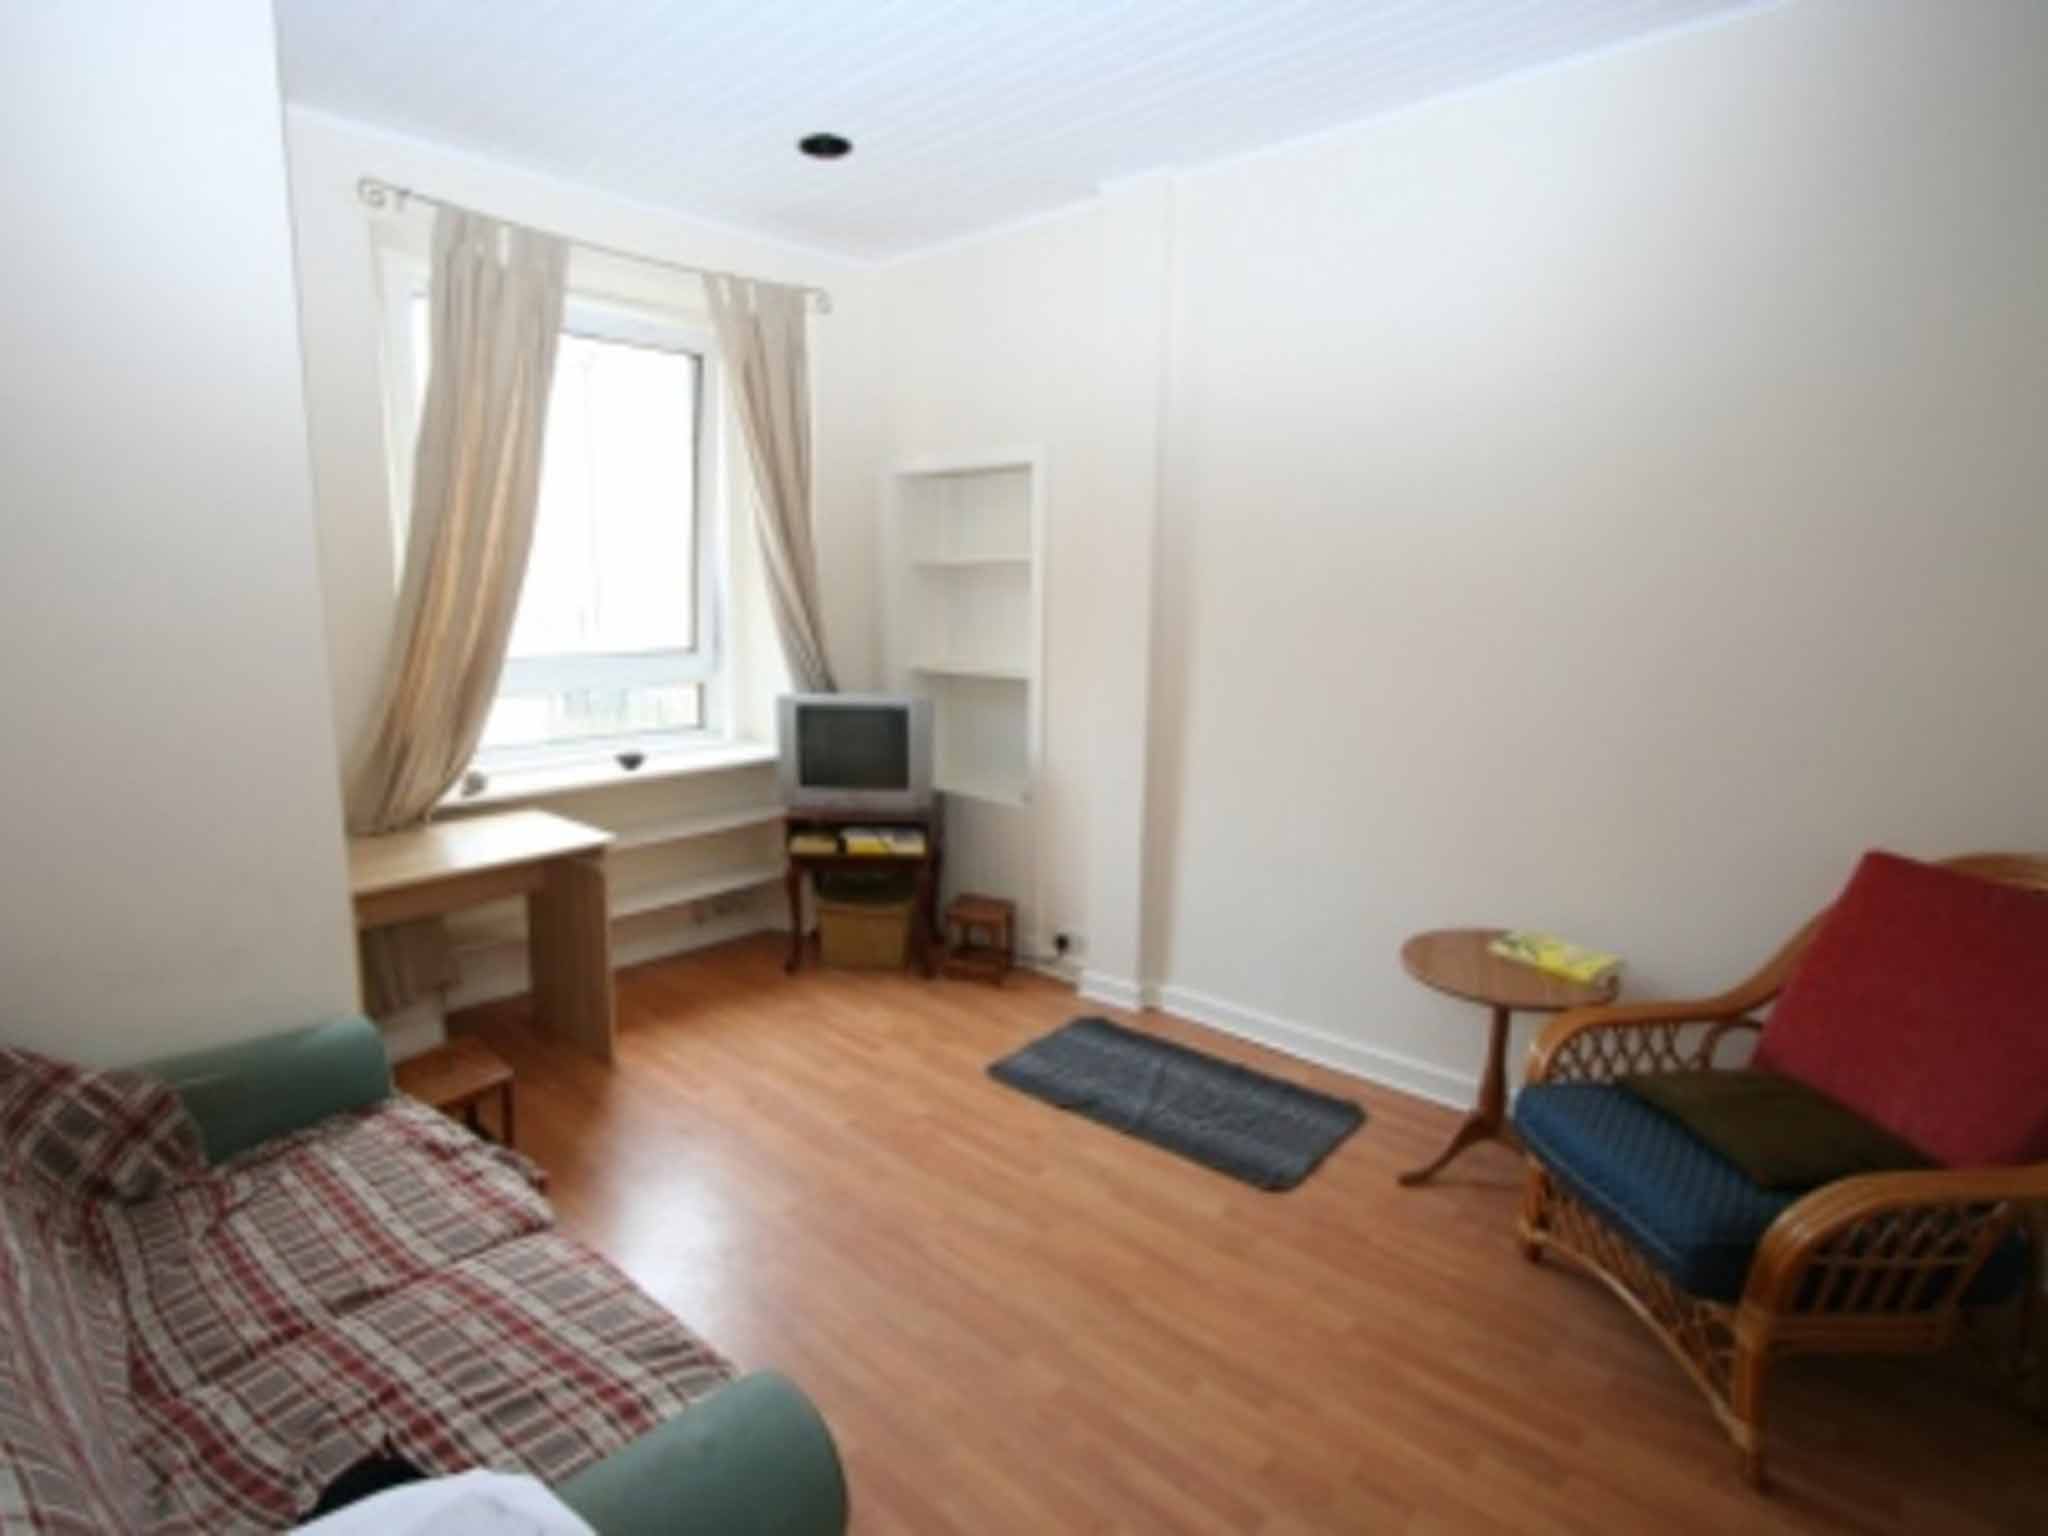 One bedroom flat to rent, Smithfield Street, Edinburgh EH11. On with 1-2-Let for £495 pcm (£114 pw).